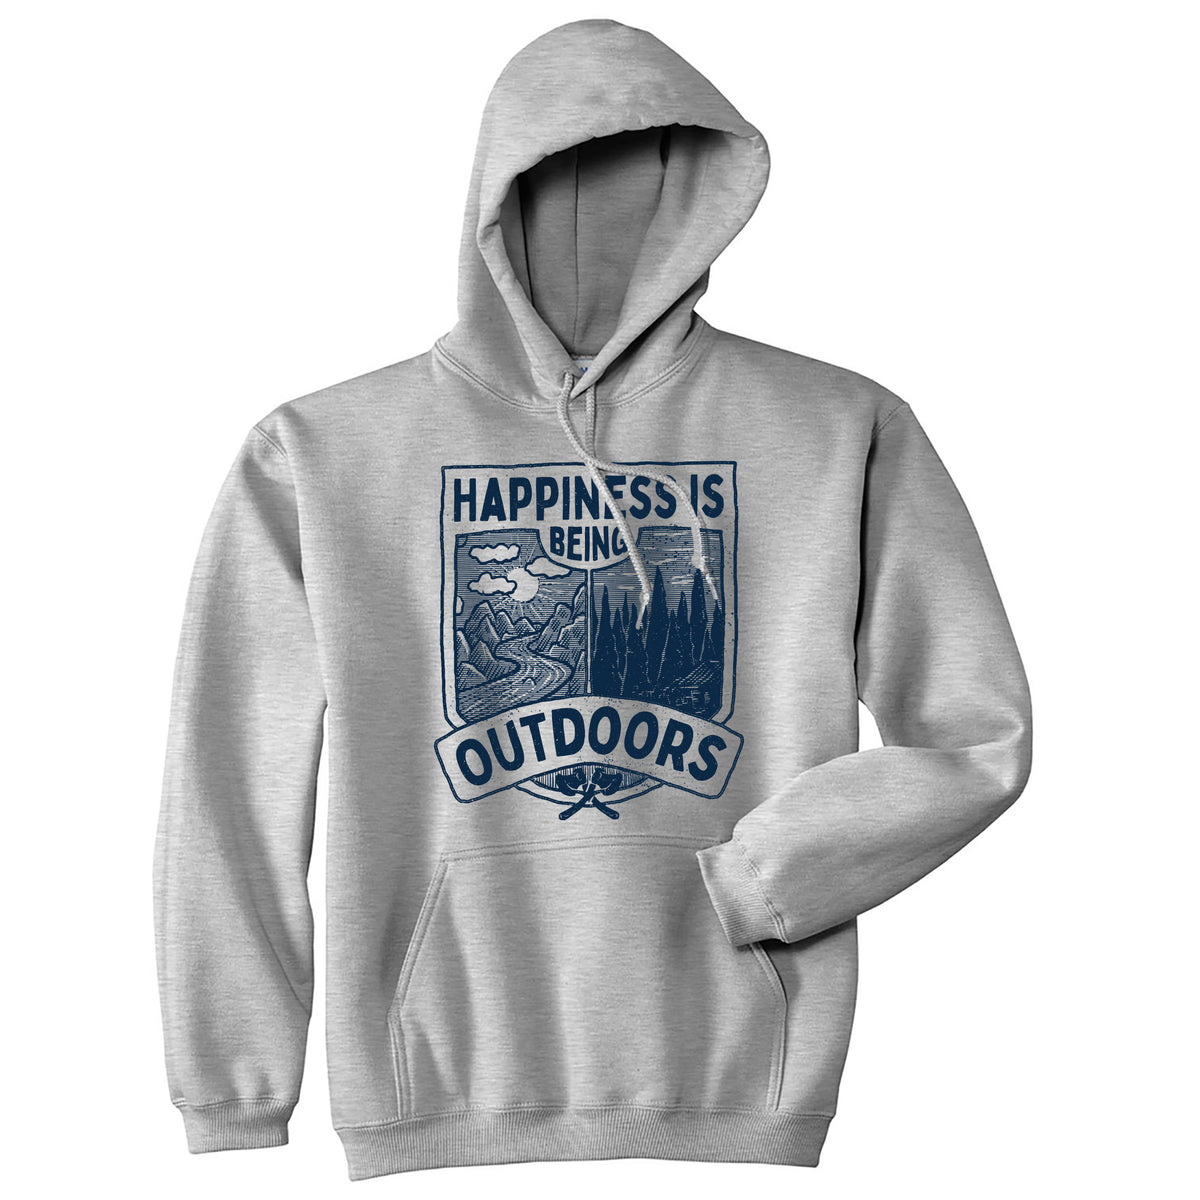 Funny Light Heather Grey - Being Outdoors Happiness Is Being Outdoors Hoodie Nerdy Camping Tee